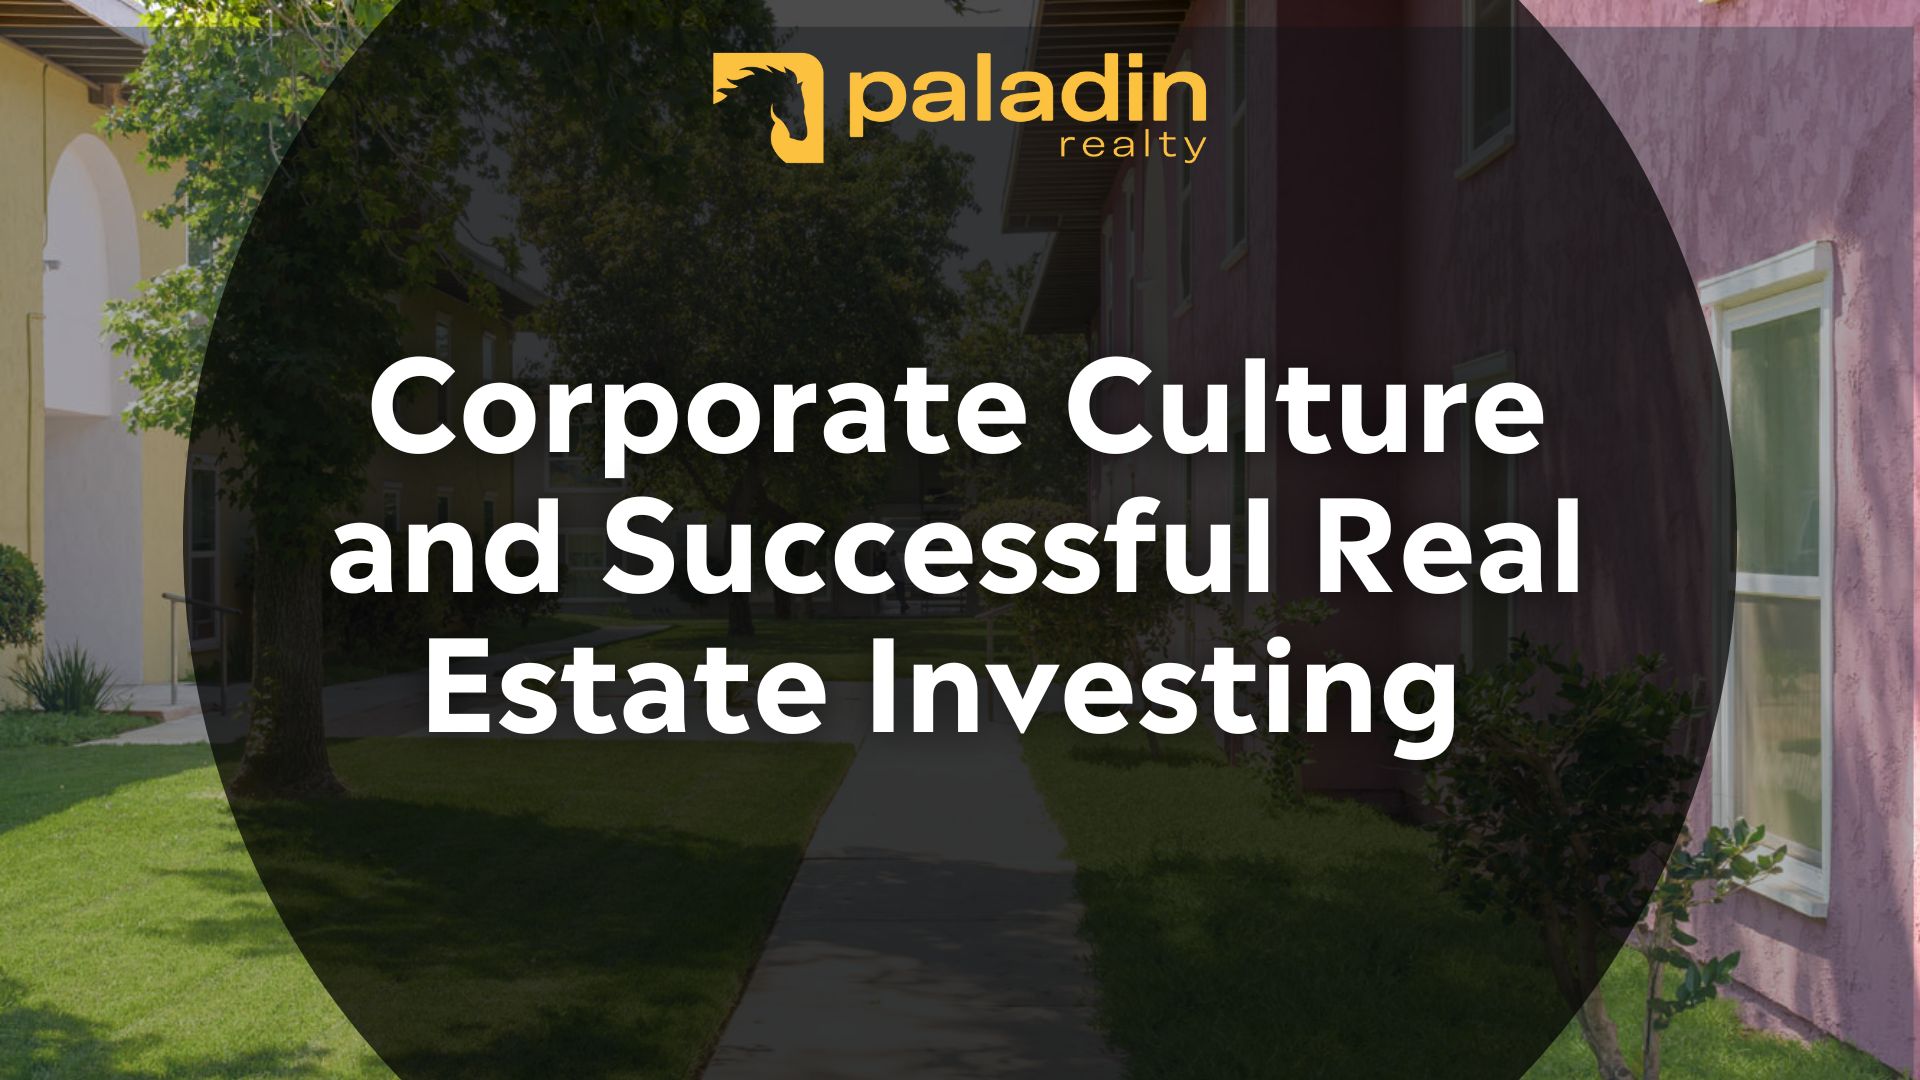 FI [web] - Corporate Culture and Successful Real Estate Investing - An Interview With Paladin CoFounder Fred Gortner